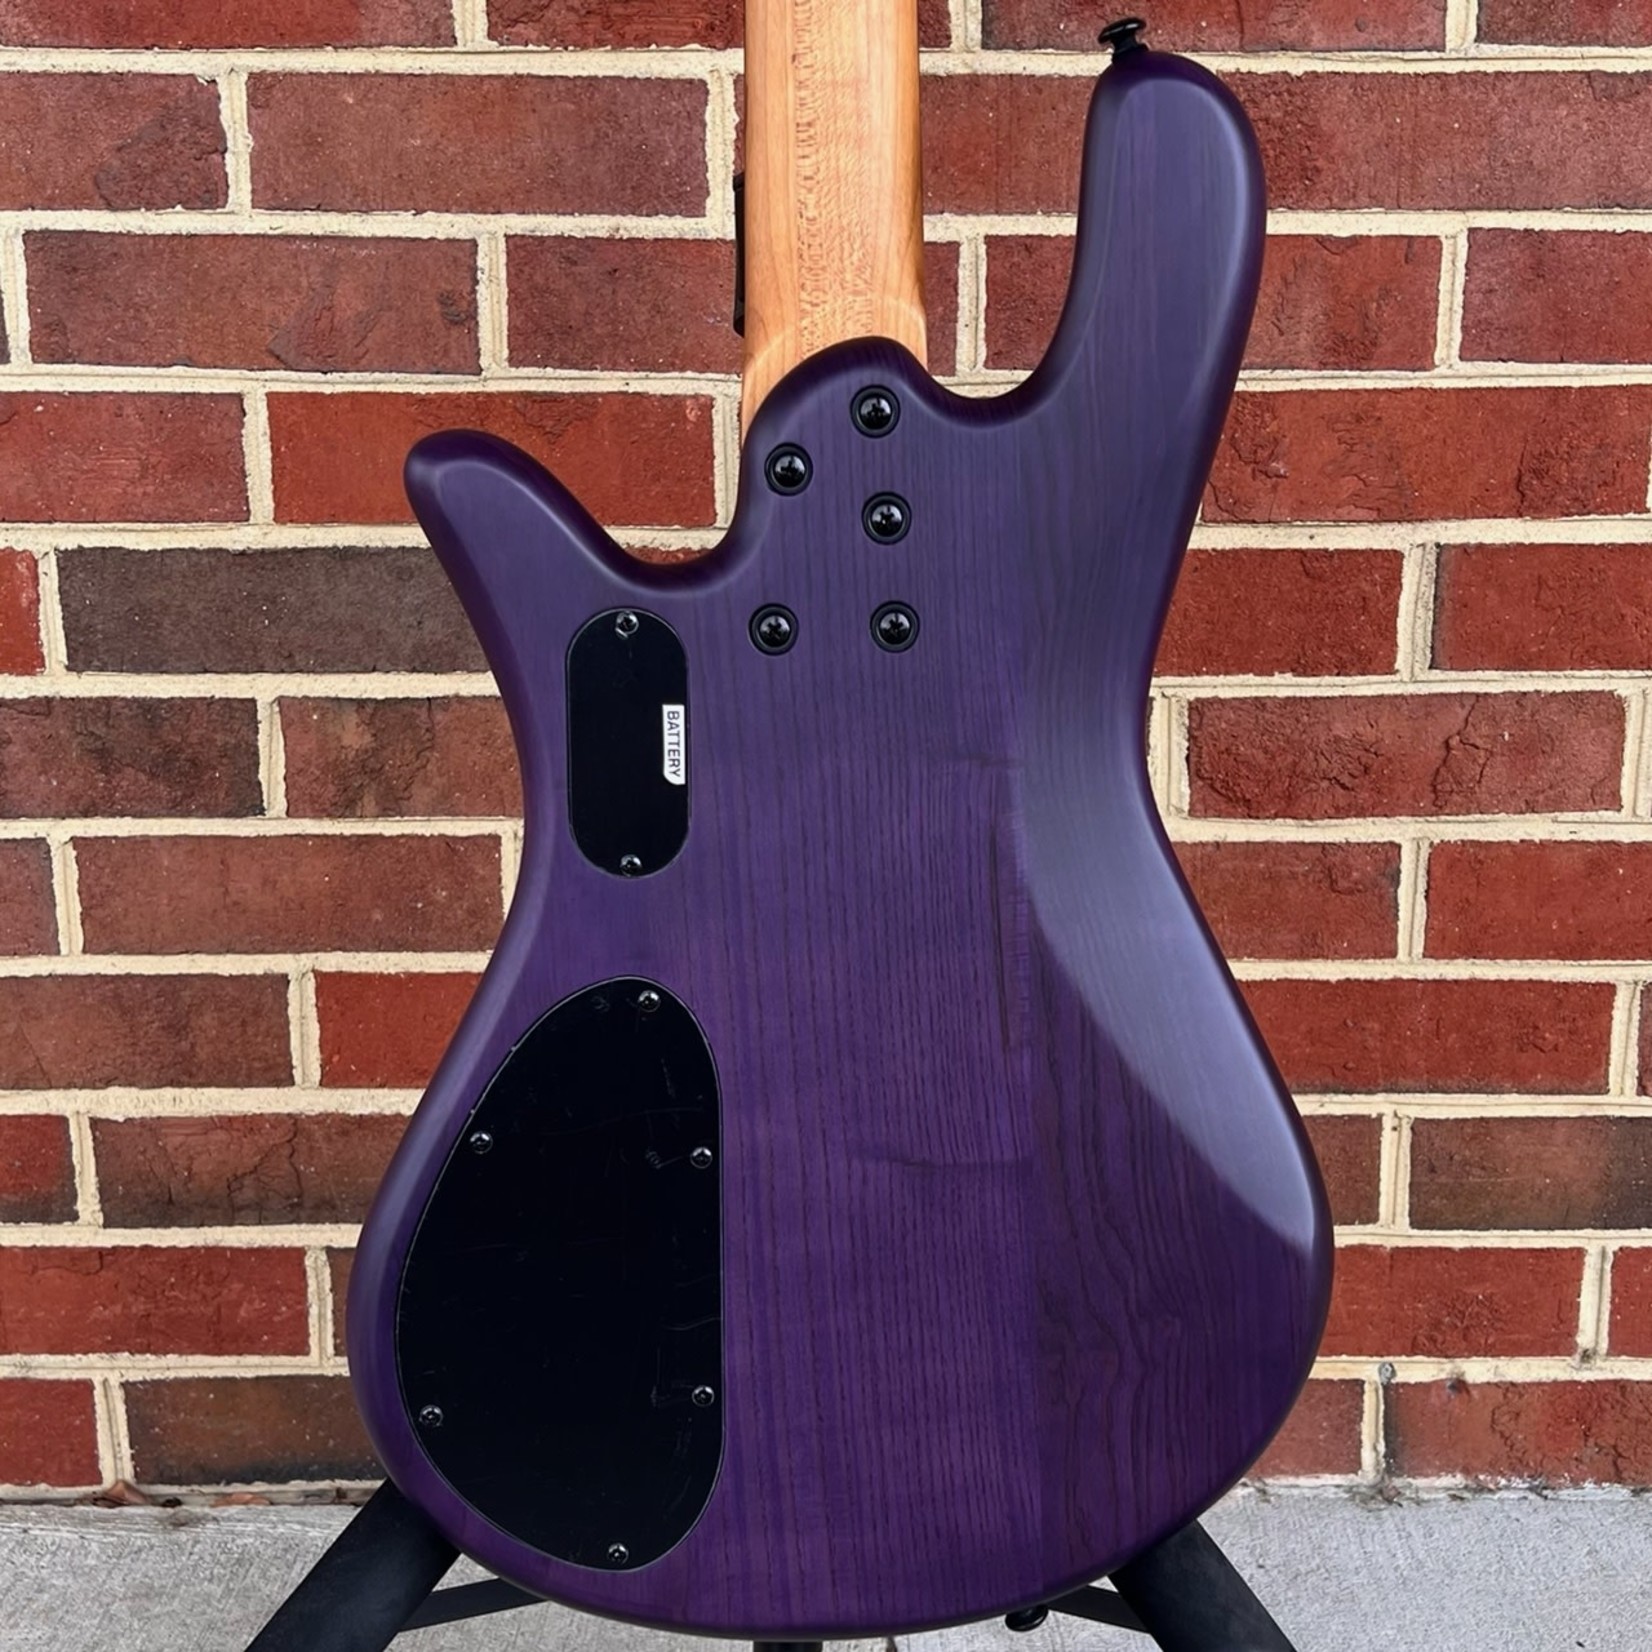 Spector Spector NS Pulse II 4-String, Ultra Violet Matte, Quilted Maple Top, Swamp Ash Body, Roasted Maple Neck, Macassar Ebony Fretboard, SN# W211417